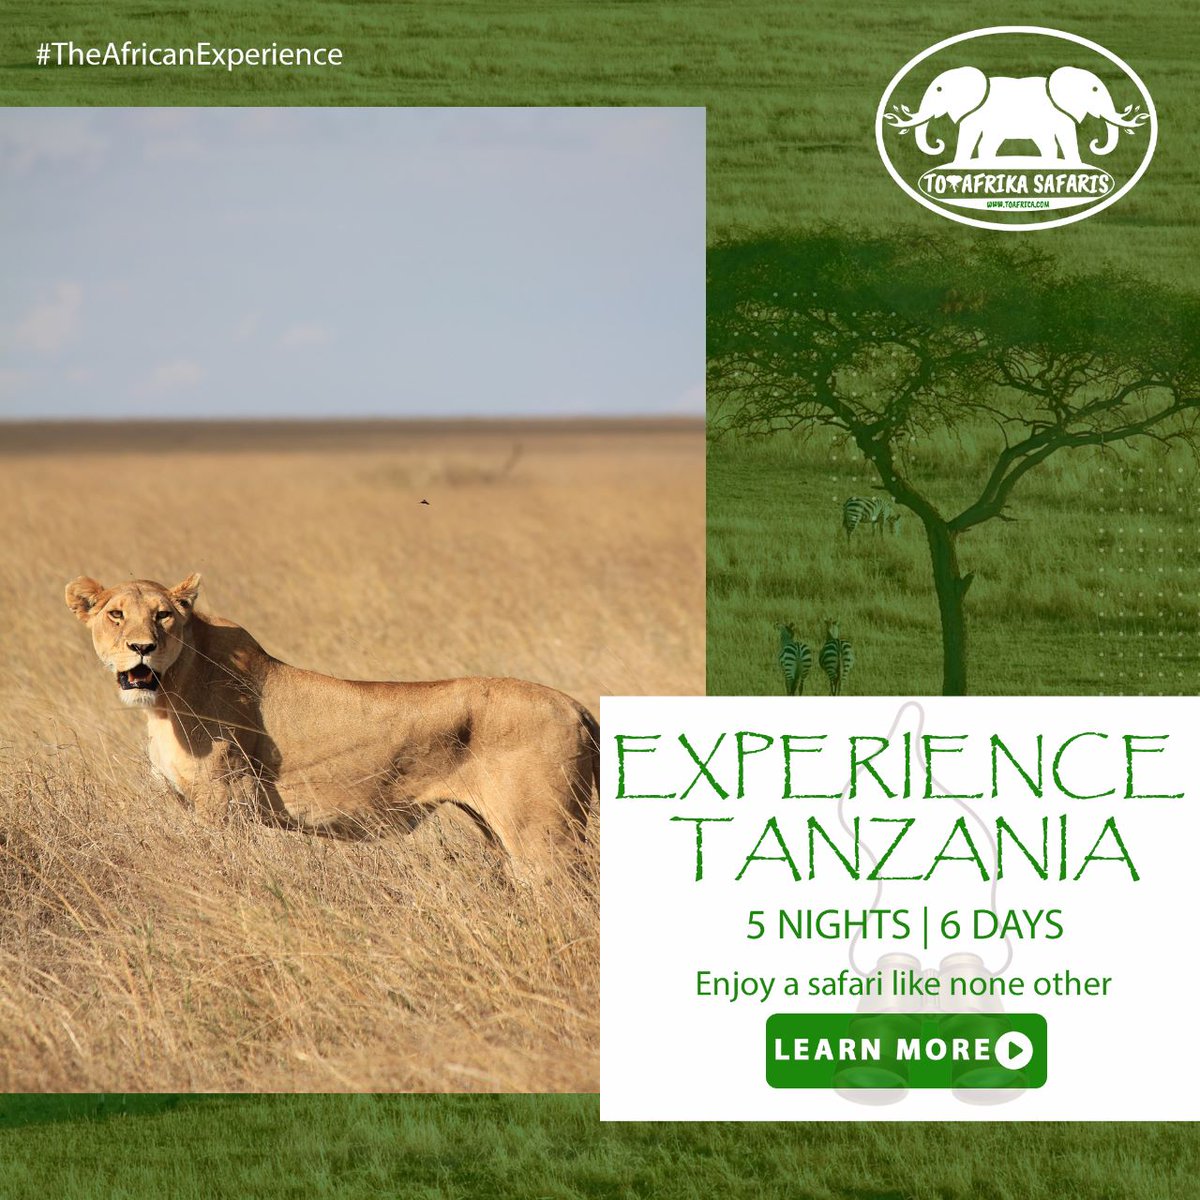 Discover the wonders of Tanzania with ToAfrika Safaris. Tanzania is a land of diverse wildlife and breathtaking landscapes.

For bookings: 
📲+254 – 748 717 387
📧info@toafrika.com

#Tanzania #ExploreEastAfrica #WildlifeWonders #Travel #Adventures #ToAfrikaSafaris